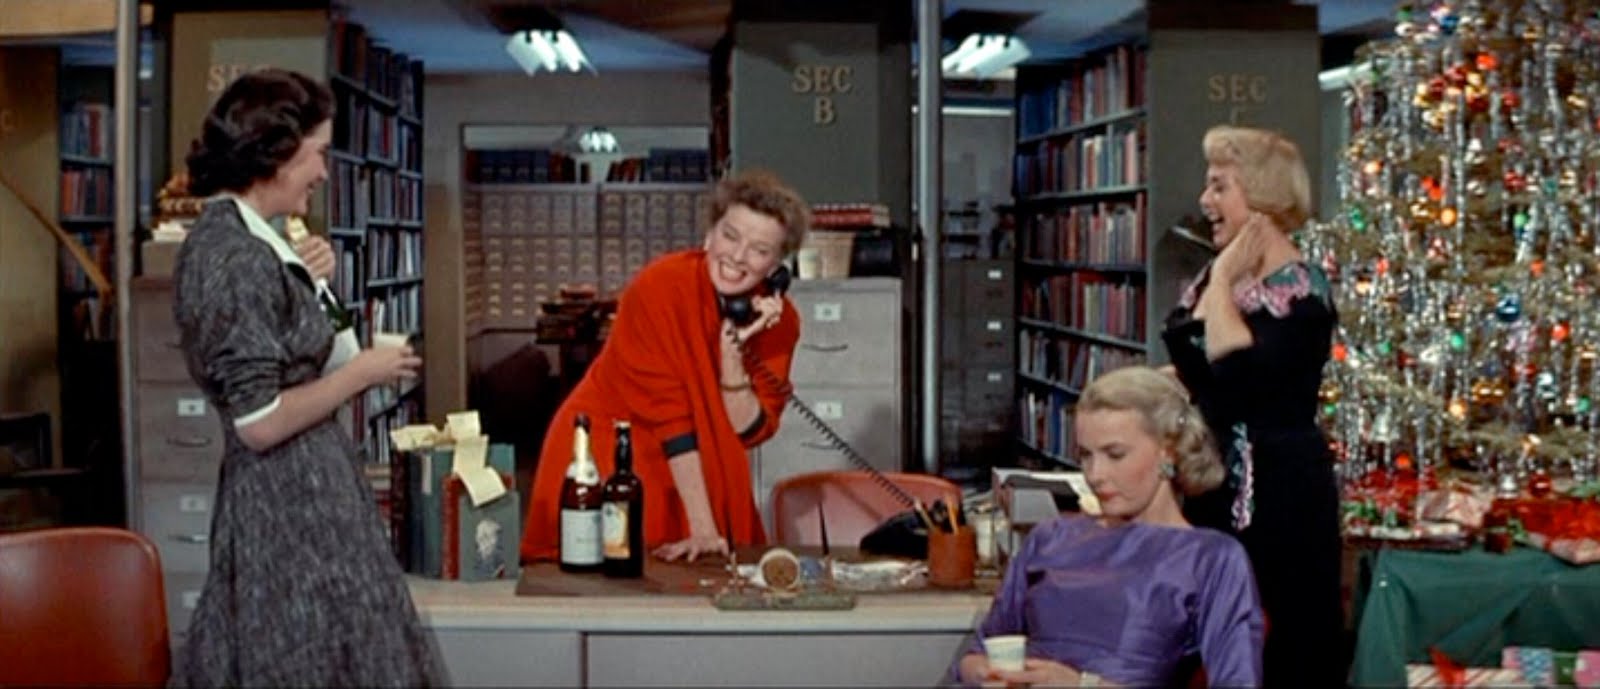 Can You Name These 1950s Romantic Comedy Movies? 14